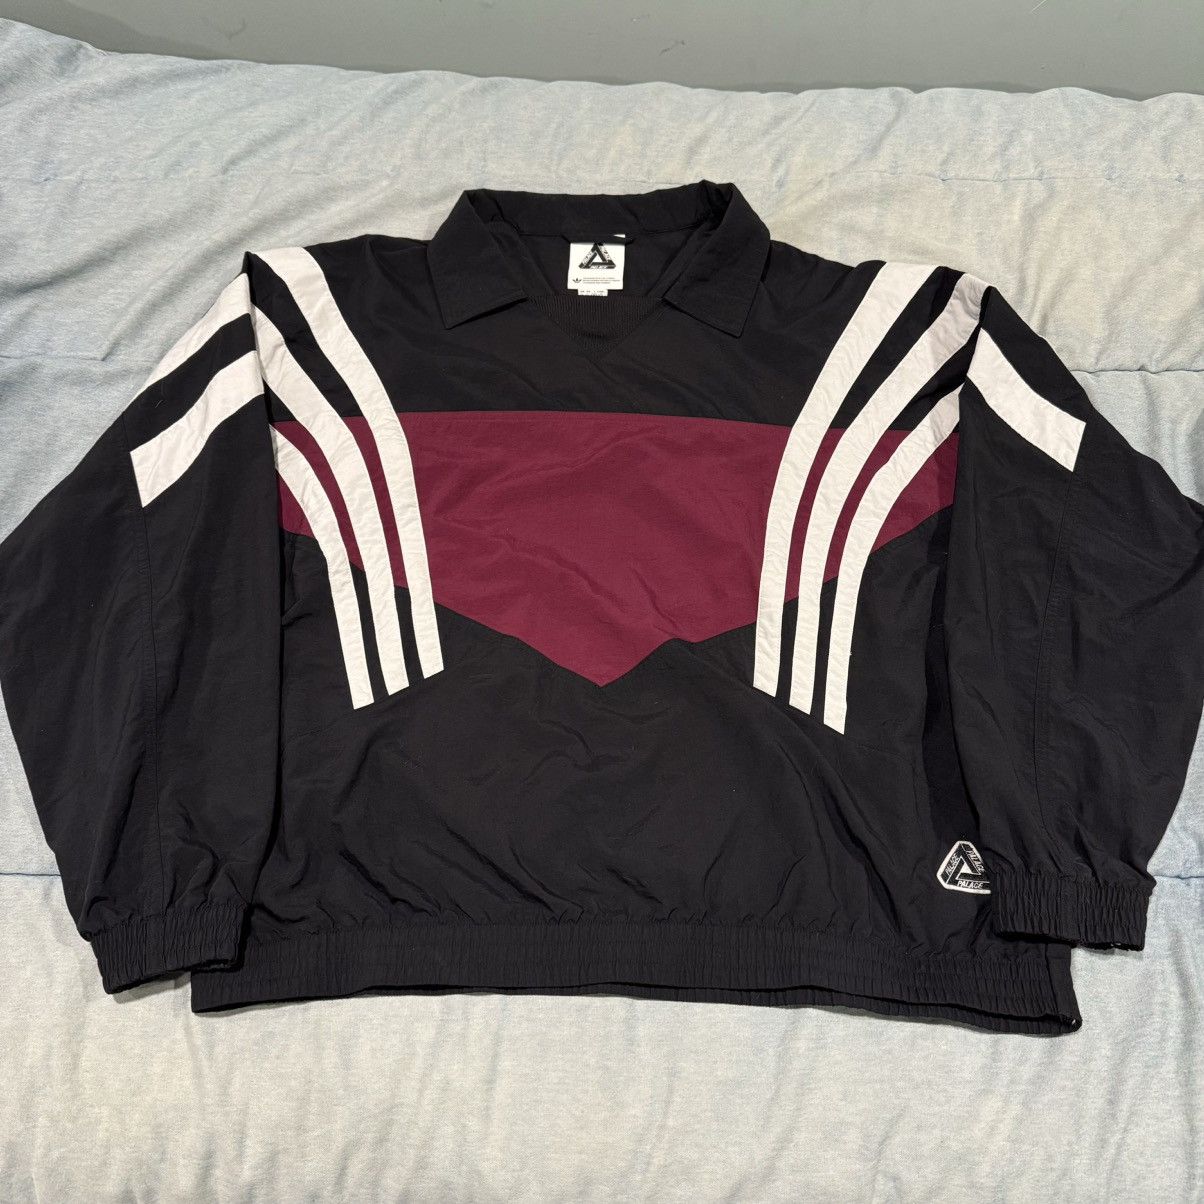 Adidas Palace X Adidas Originals Warm Up Shower Pullover Top | Grailed